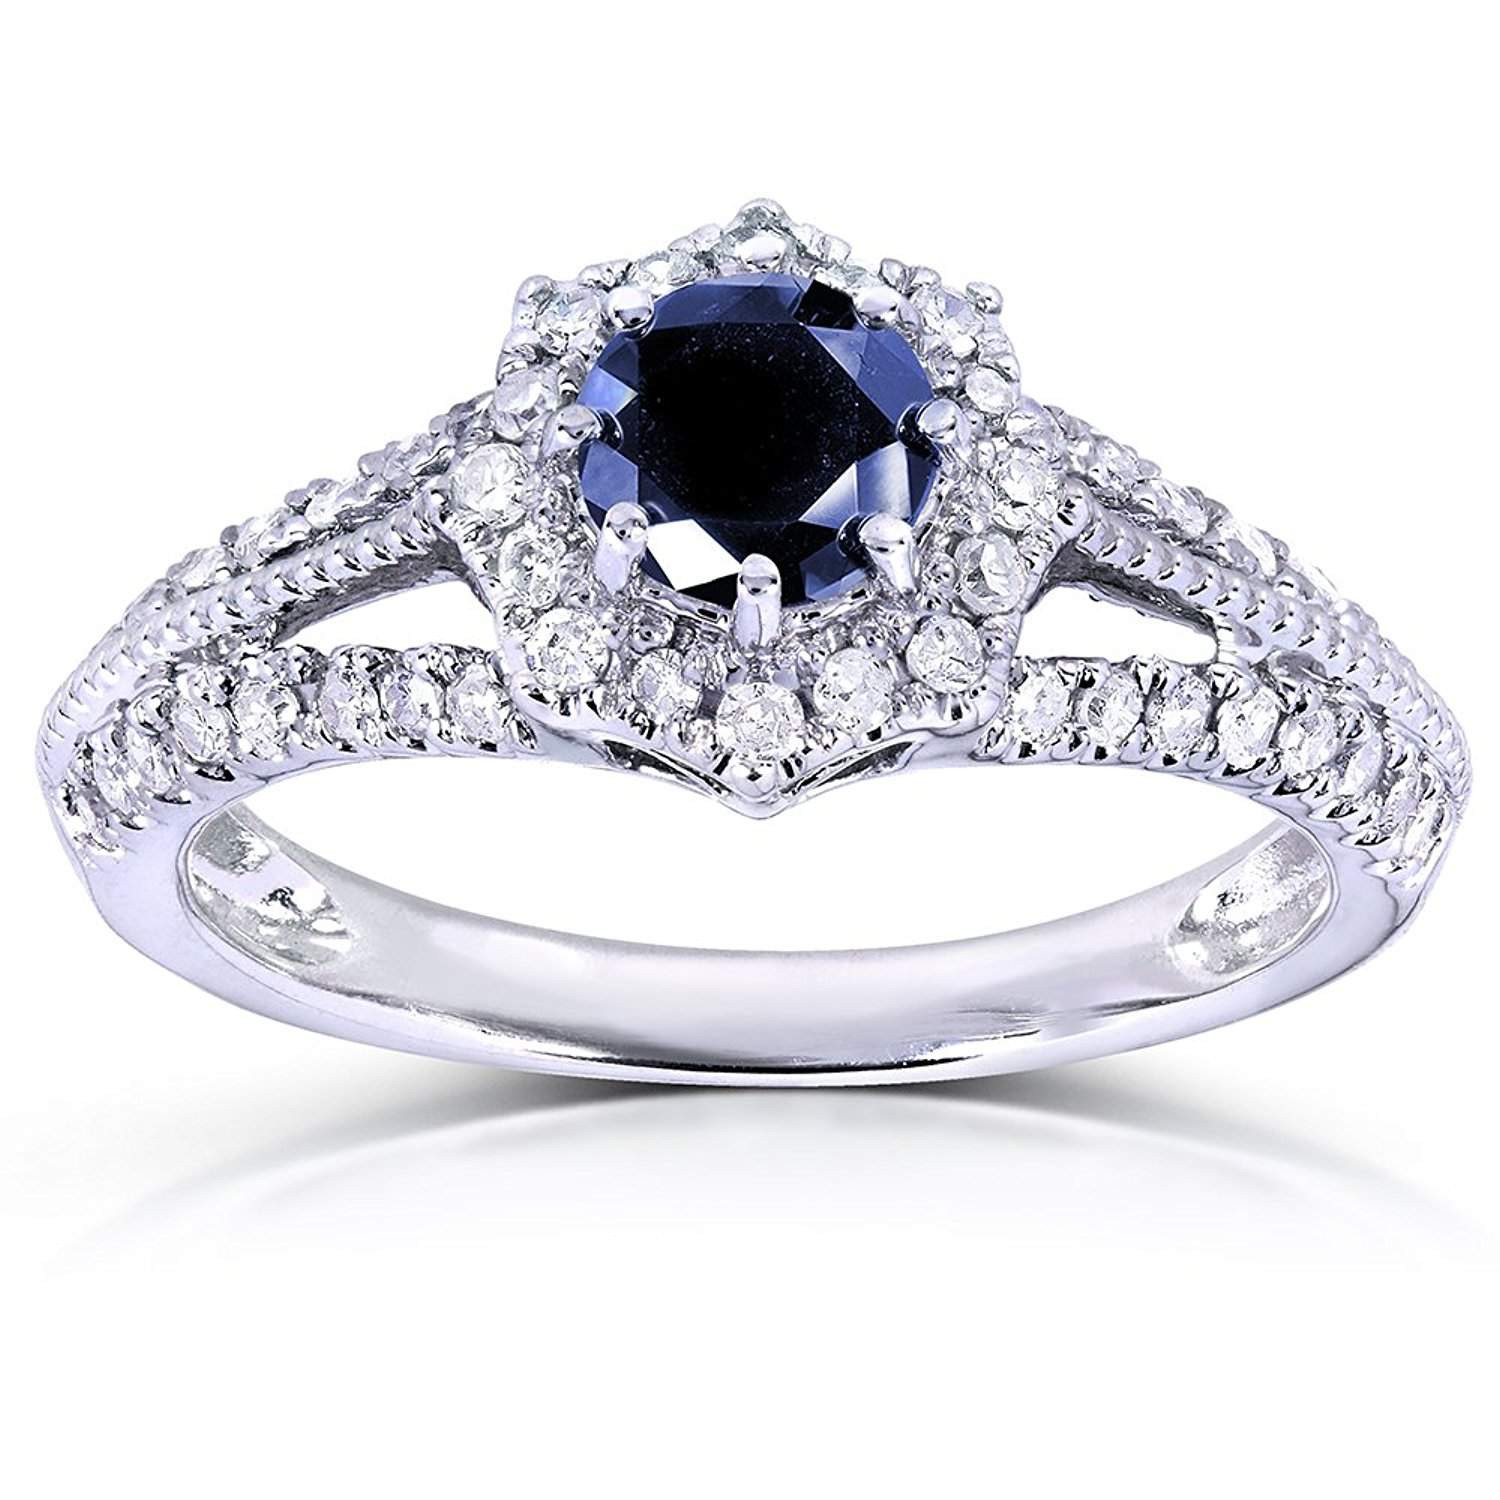 Diamond Rings Cheap
 Top 10 Best Valentine’s Day Deals on Engagement Rings